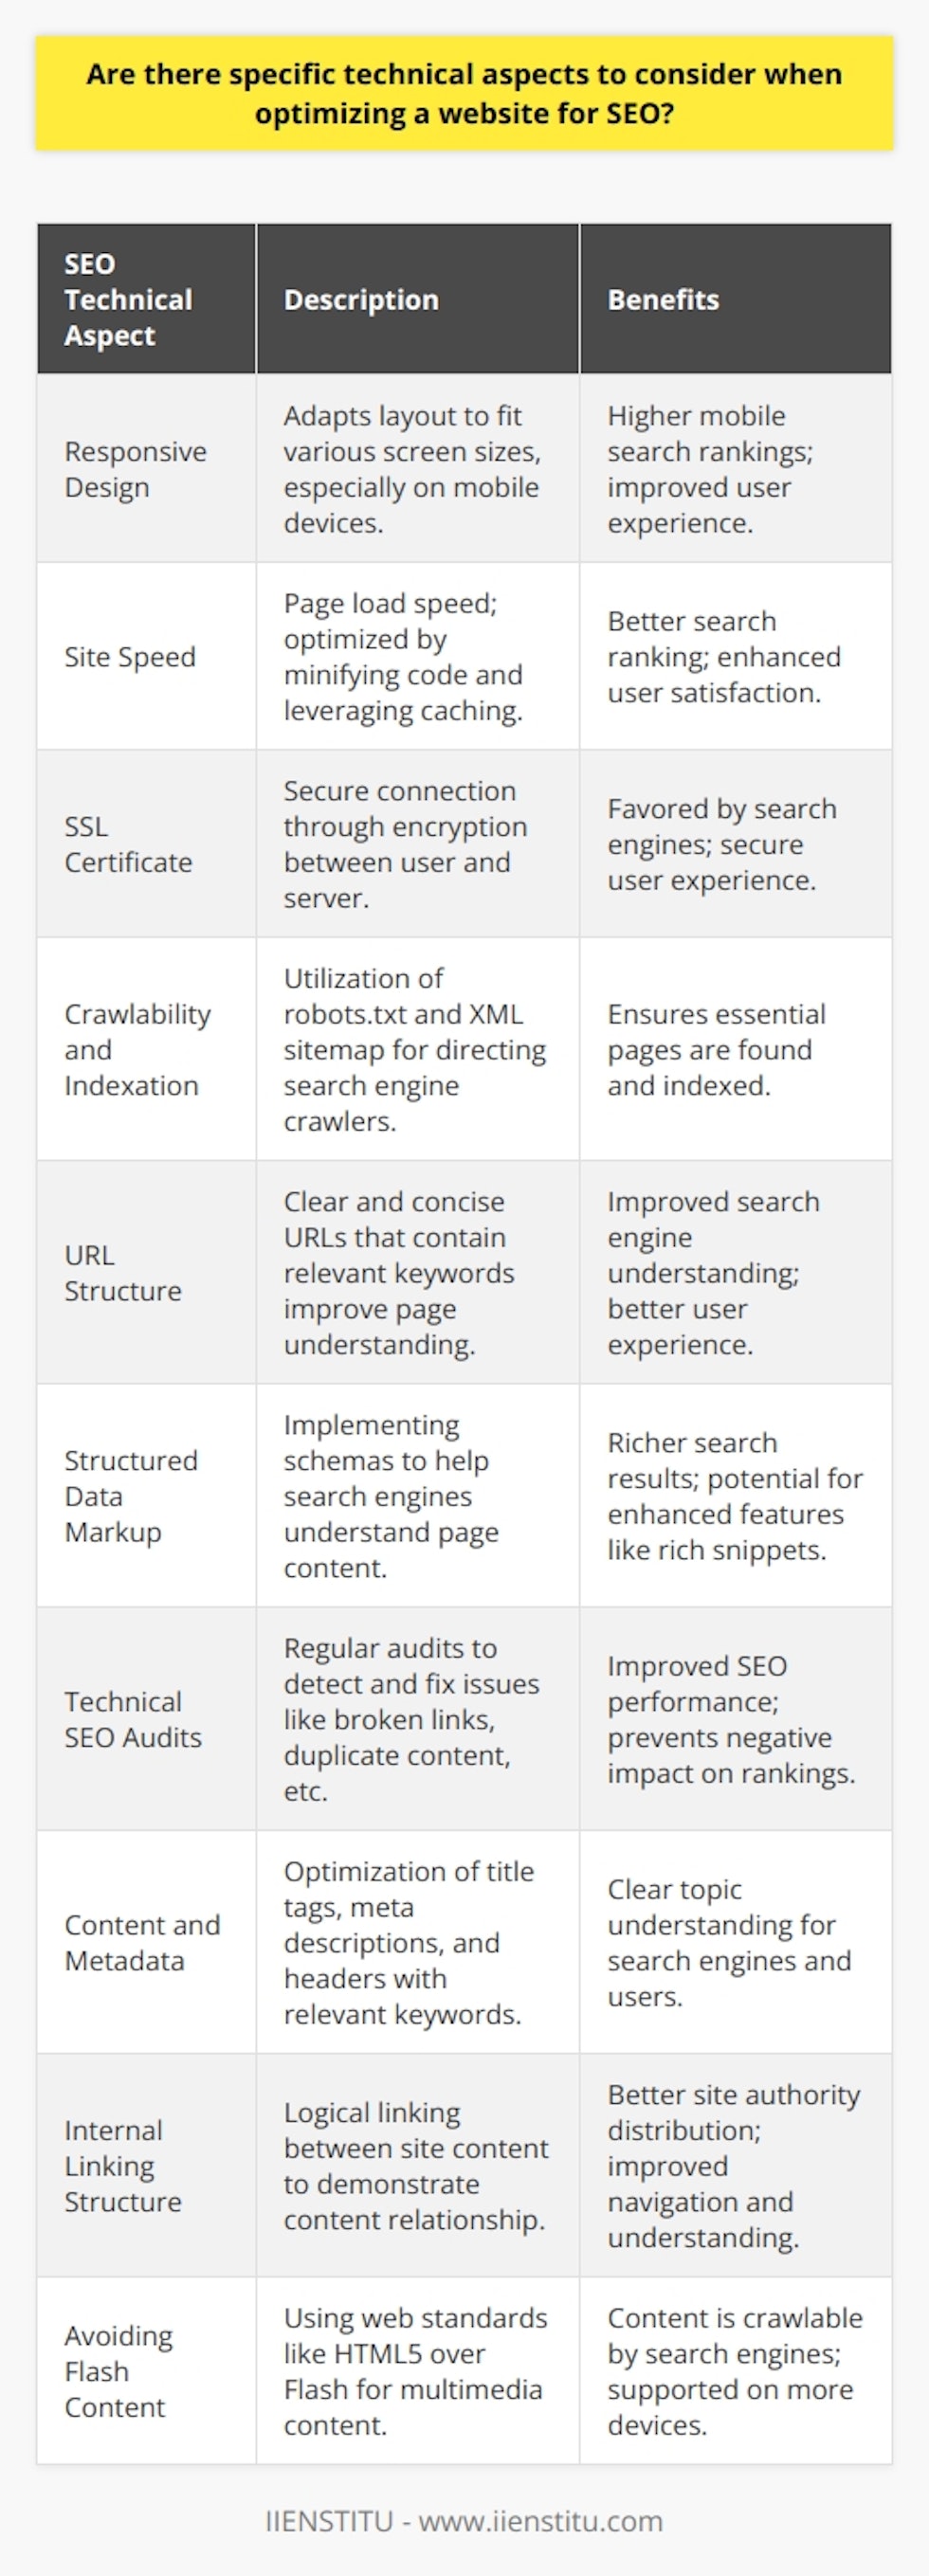 Optimizing a website for search engine optimization (SEO) goes beyond just keywords and content. The technical structure of a site plays a vital role in dictating its success in search engine rankings. Here are some of the critical technical aspects that can enhance SEO capabilities of a website:1. **Responsive Design:** A responsive web design automatically adjusts the layout to fit different screen sizes, particularly on mobile devices. Search engines, like Google, reward mobile-friendly sites with higher rankings in mobile search results.2. **Site Speed:** One of the most critical performance metrics for SEO is page load speed. Sites with faster load times tend to rank higher. Load speed affects user experience, which in turn influences search rankings. Optimizing images, minifying CSS and JavaScript files, and leveraging browser caching can improve load times.3. **SSL Certificate:** A Secure Socket Layer (SSL) certificate encrypts data between the user and the server, promoting a secure connection. Search engines favor HTTPS sites because they provide a more secure user experience.4. **Crawlability and Indexation:** To rank your content, search engines first need to be able to crawl and index your site pages. A well-crafted robots.txt file and an XML sitemap can guide search engines through your site, ensuring that all essential pages are found and indexed.5. **URL Structure:** Search engines and users prefer URLs that are descriptive and concise. A clear URL structure with appropriate use of keywords helps in SEO as it improves the understanding of the page content.6. **Structured Data Markup:** Implementing structured data (using schemas) helps search engines to not only crawl, but also to understand the content of your pages. This can lead to richer search results, including enhanced features like quick answers or rich snippets.7. **Technical SEO Audits:** Regular SEO audits can detect issues such as broken links, duplicate content, poor mobile usability, and overuse of scripts that can harm your site’s SEO performance. Tools specifically created for SEO audits can help identify and fix these issues - IIENSTITU offers courses and resources regarding this topic.8. **Content and Metadata:** Optimizing title tags, meta descriptions, and header tags is essential for search engines and users to understand the topic of each page. Ensure that meta tags are not too long, unique for each page, and include relevant keywords.9. **Internal Linking Structure:** A logical and extensive internal linking structure can help search engines understand the relationship between various content on your site, distribute page authority throughout the site, and improve navigation for users.10. **Avoiding Flash Content:** Search engines cannot crawl content built in Flash very well, and many mobile devices do not support Flash. Hence, the use of HTML5 and other web standards are recommended for interactive and multimedia content.Incorporating these technical SEO aspects into your website's design and maintenance routine can greatly increase your site's visibility and rankings. While some of these techniques might require a bit of technical know-how, the payoff in terms of SEO can be substantial.